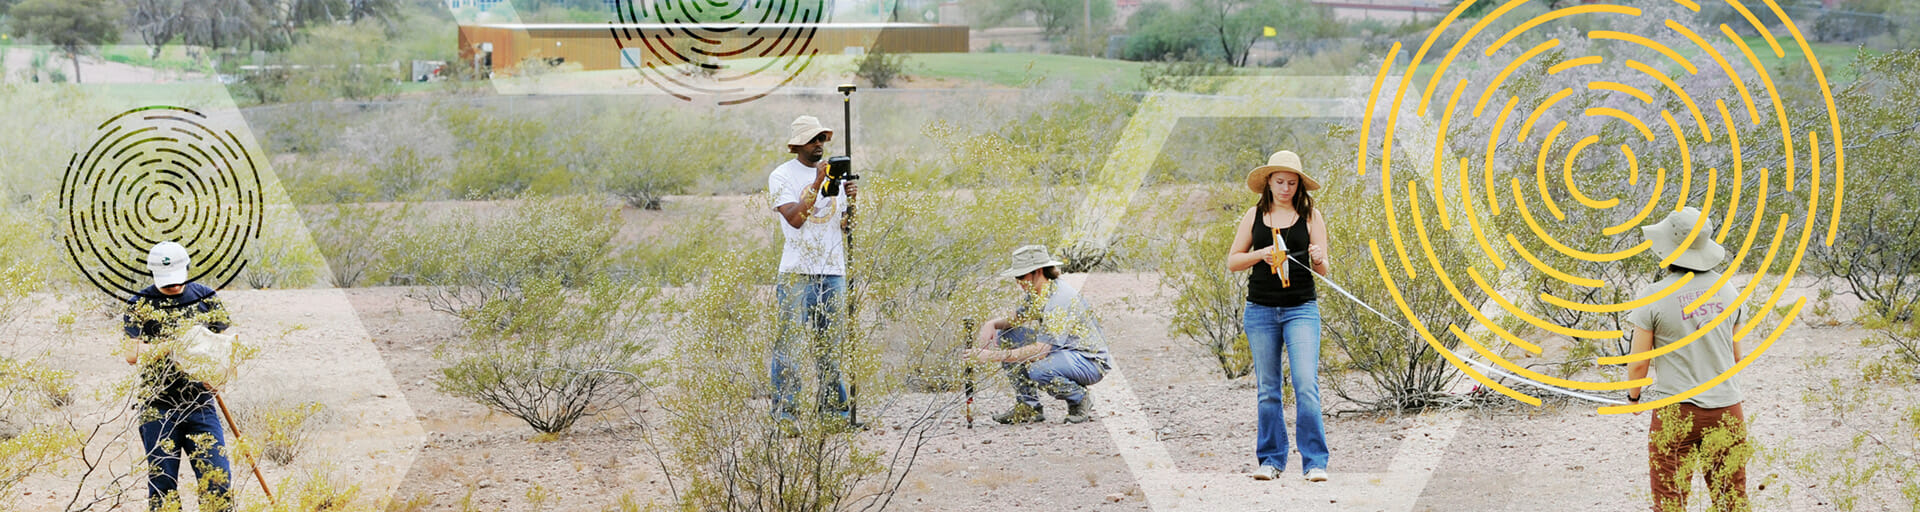 researchers in the desert